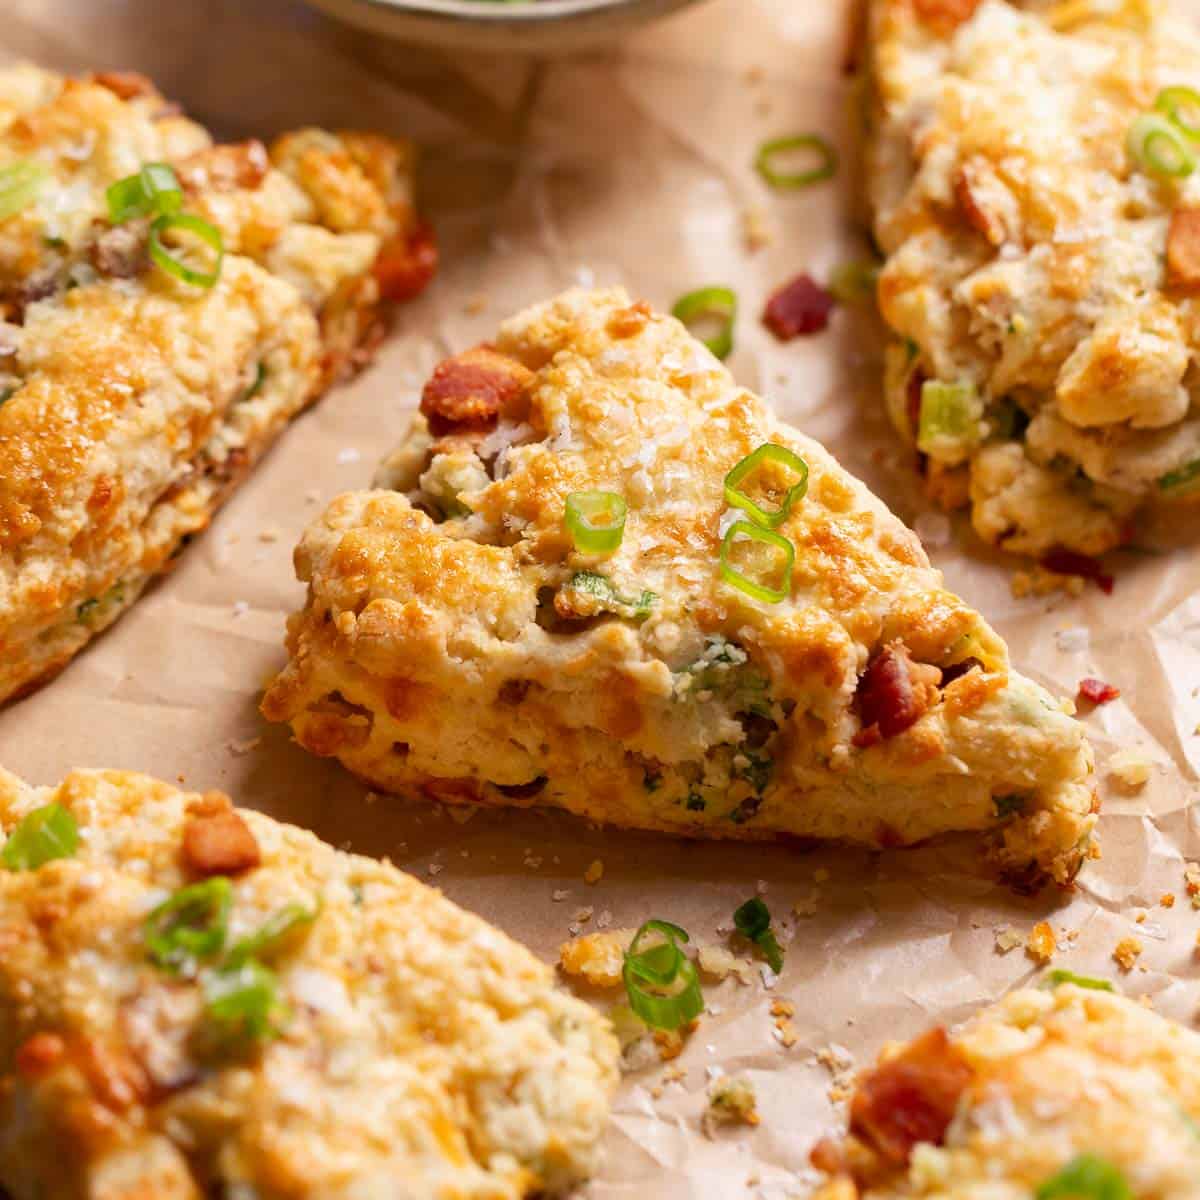 Savory bacon cheddar scones on parchment paper.